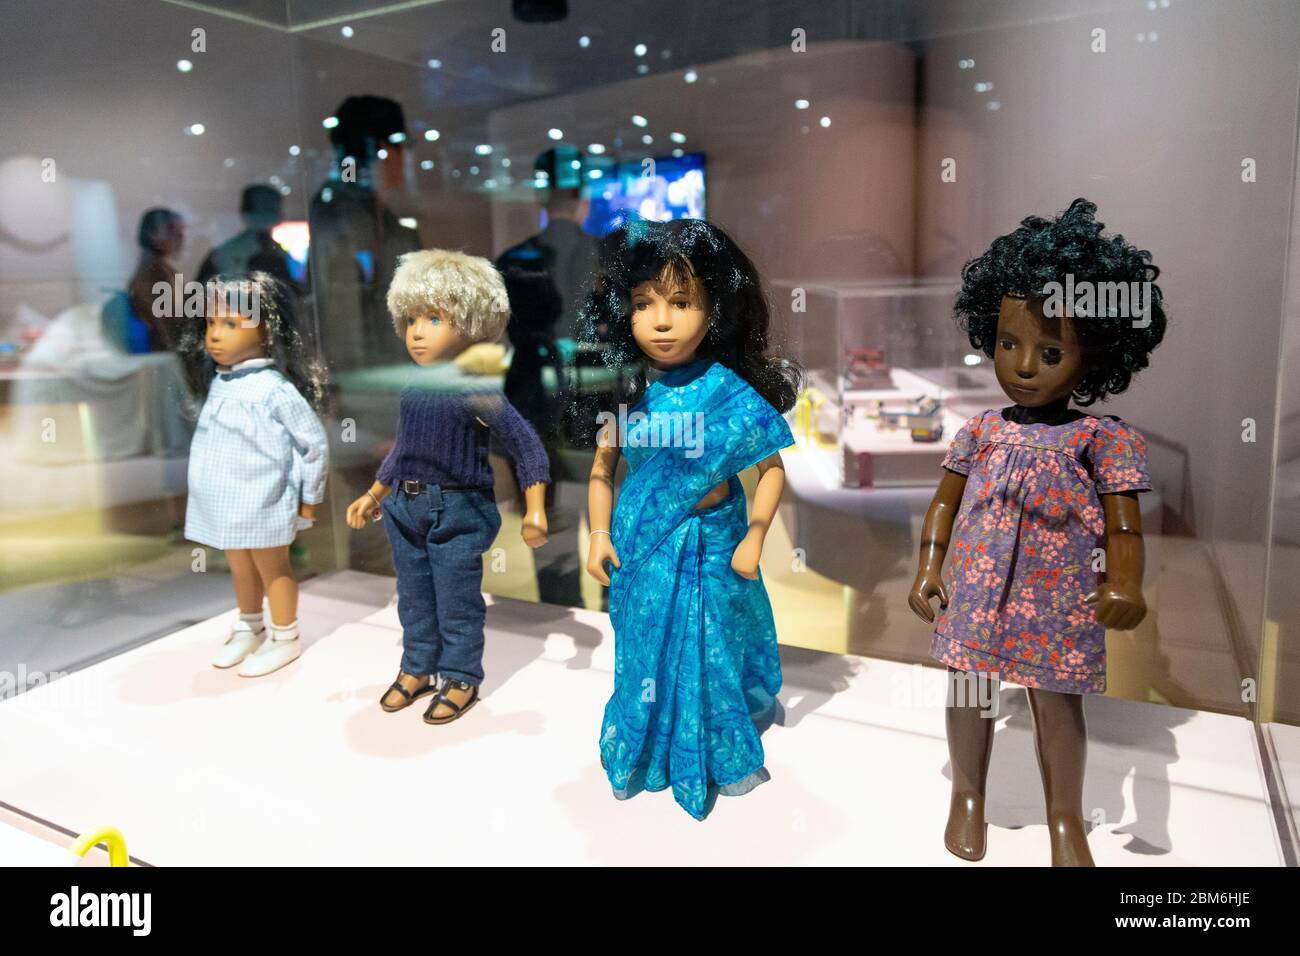 Sasha dolls highlighting diversity, different cultures and ethnicities at 'Play Well' exhibition at the Wellcome Collection, London, UK Stock Photo